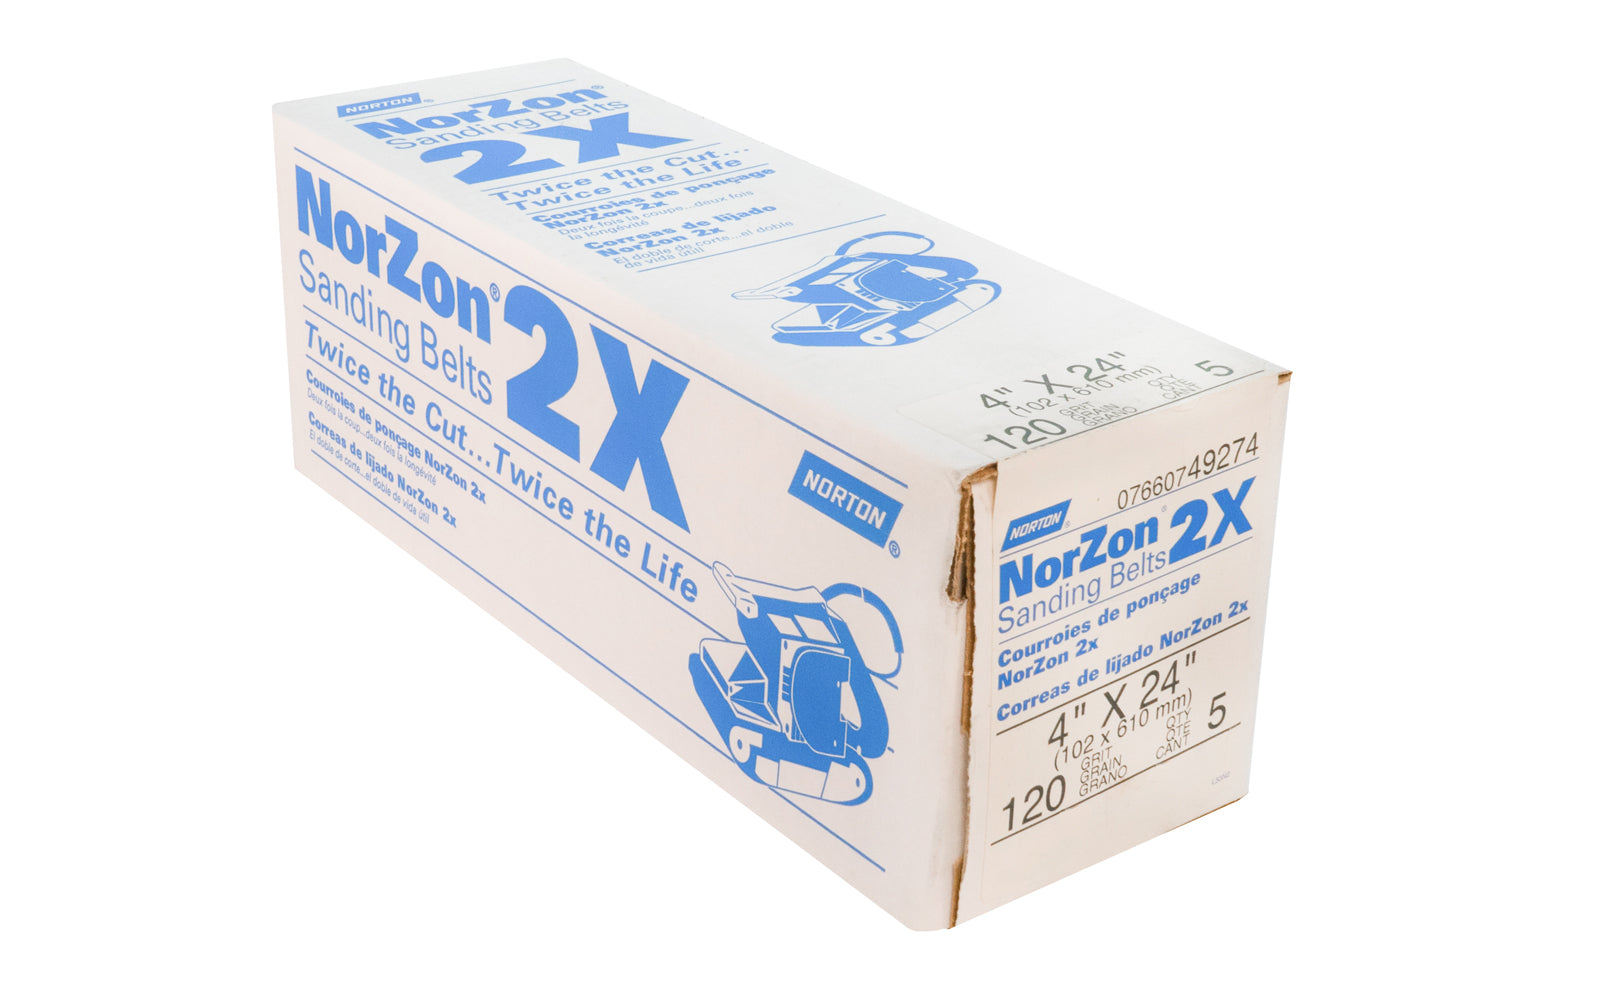 Norton "NorZon" 4" x 24" Sanding Belts - 120 Grit. These self-sharpening, zirconia aluminia abrasive is resin bonded to a heavy cloth backing for durability, rapid material removal & resistance to clogging. Belts can be run in both directions for increased sanding life. 5 Pack. Made in USA.